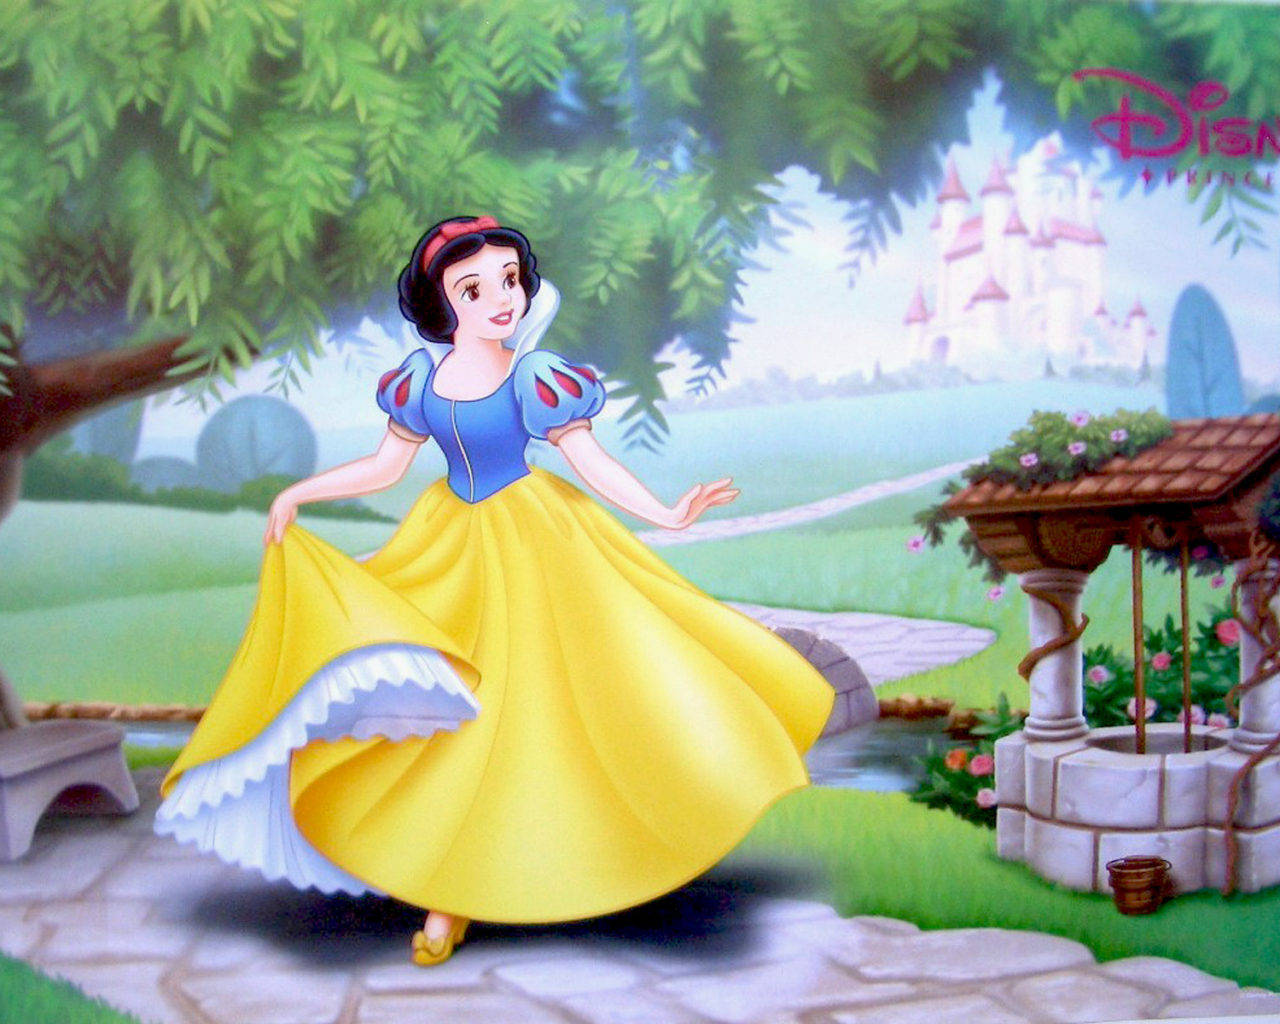 Snow White And The Seven Dwarfs With Well Wallpaper